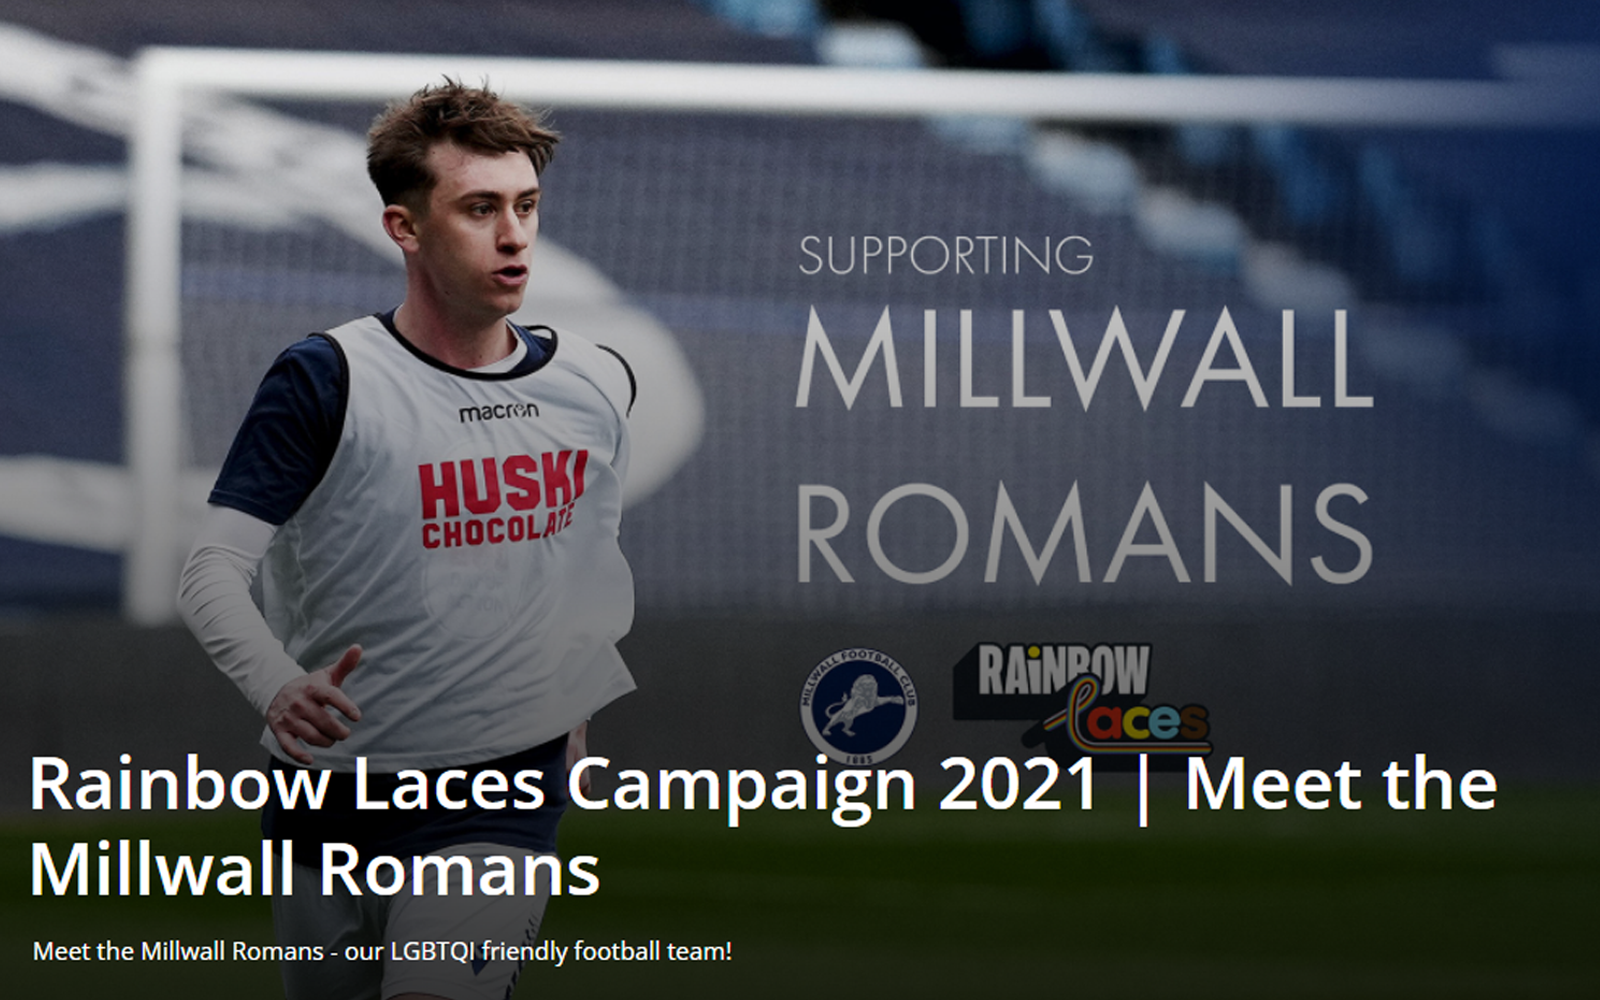 Millwall Community Trust - Millwall to support Rainbow Laces campaign this weekend